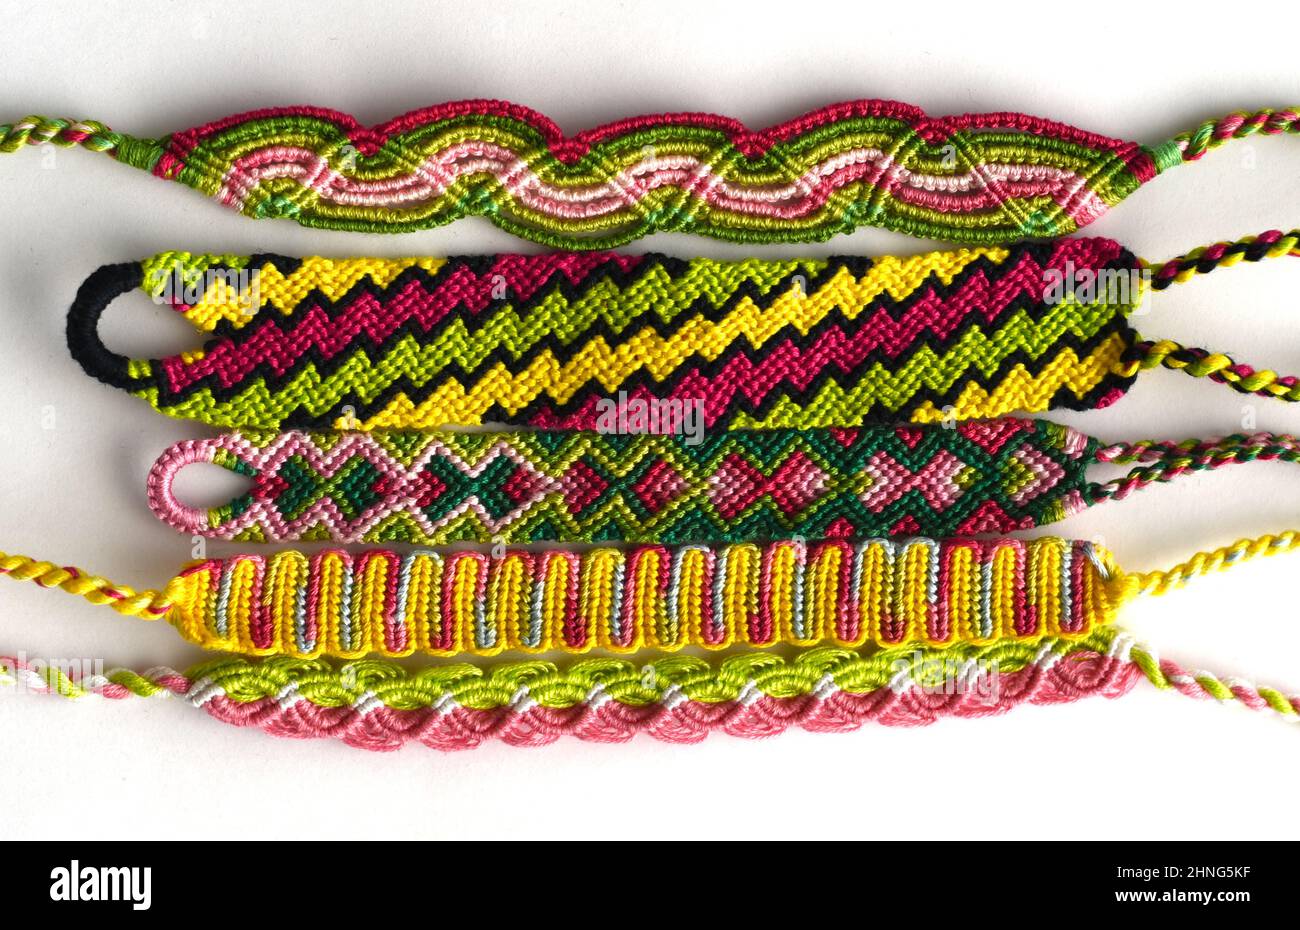 Rainbow Colors Embroidery Floss  Cross Stitch Threads  Friendship Bracelets  Floss  Crafts Floss Hand Embroidery Thread 25 Skeins Per Pack   Amazonin Home  Kitchen